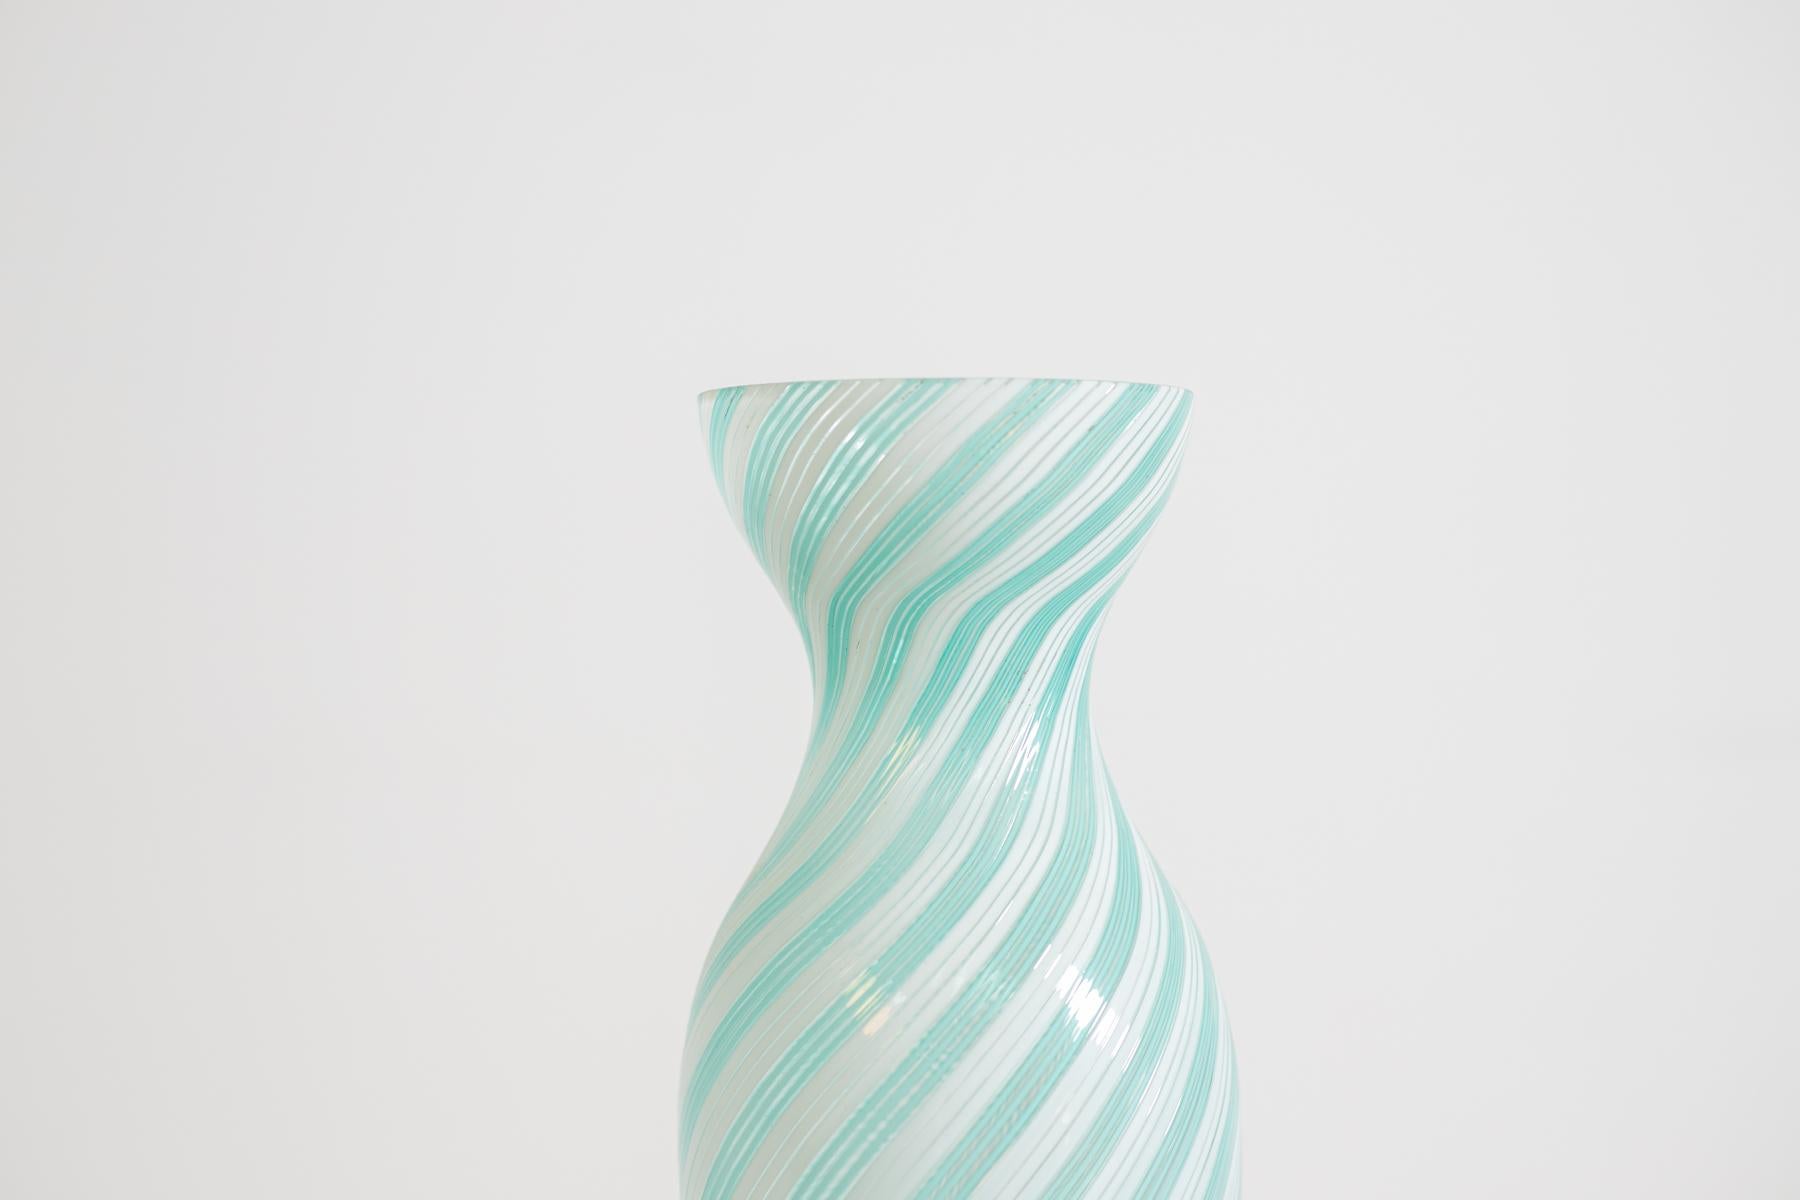 Mid-20th Century Italian Vase by Dino Martens for Barovier & Toso, 1954 For Sale